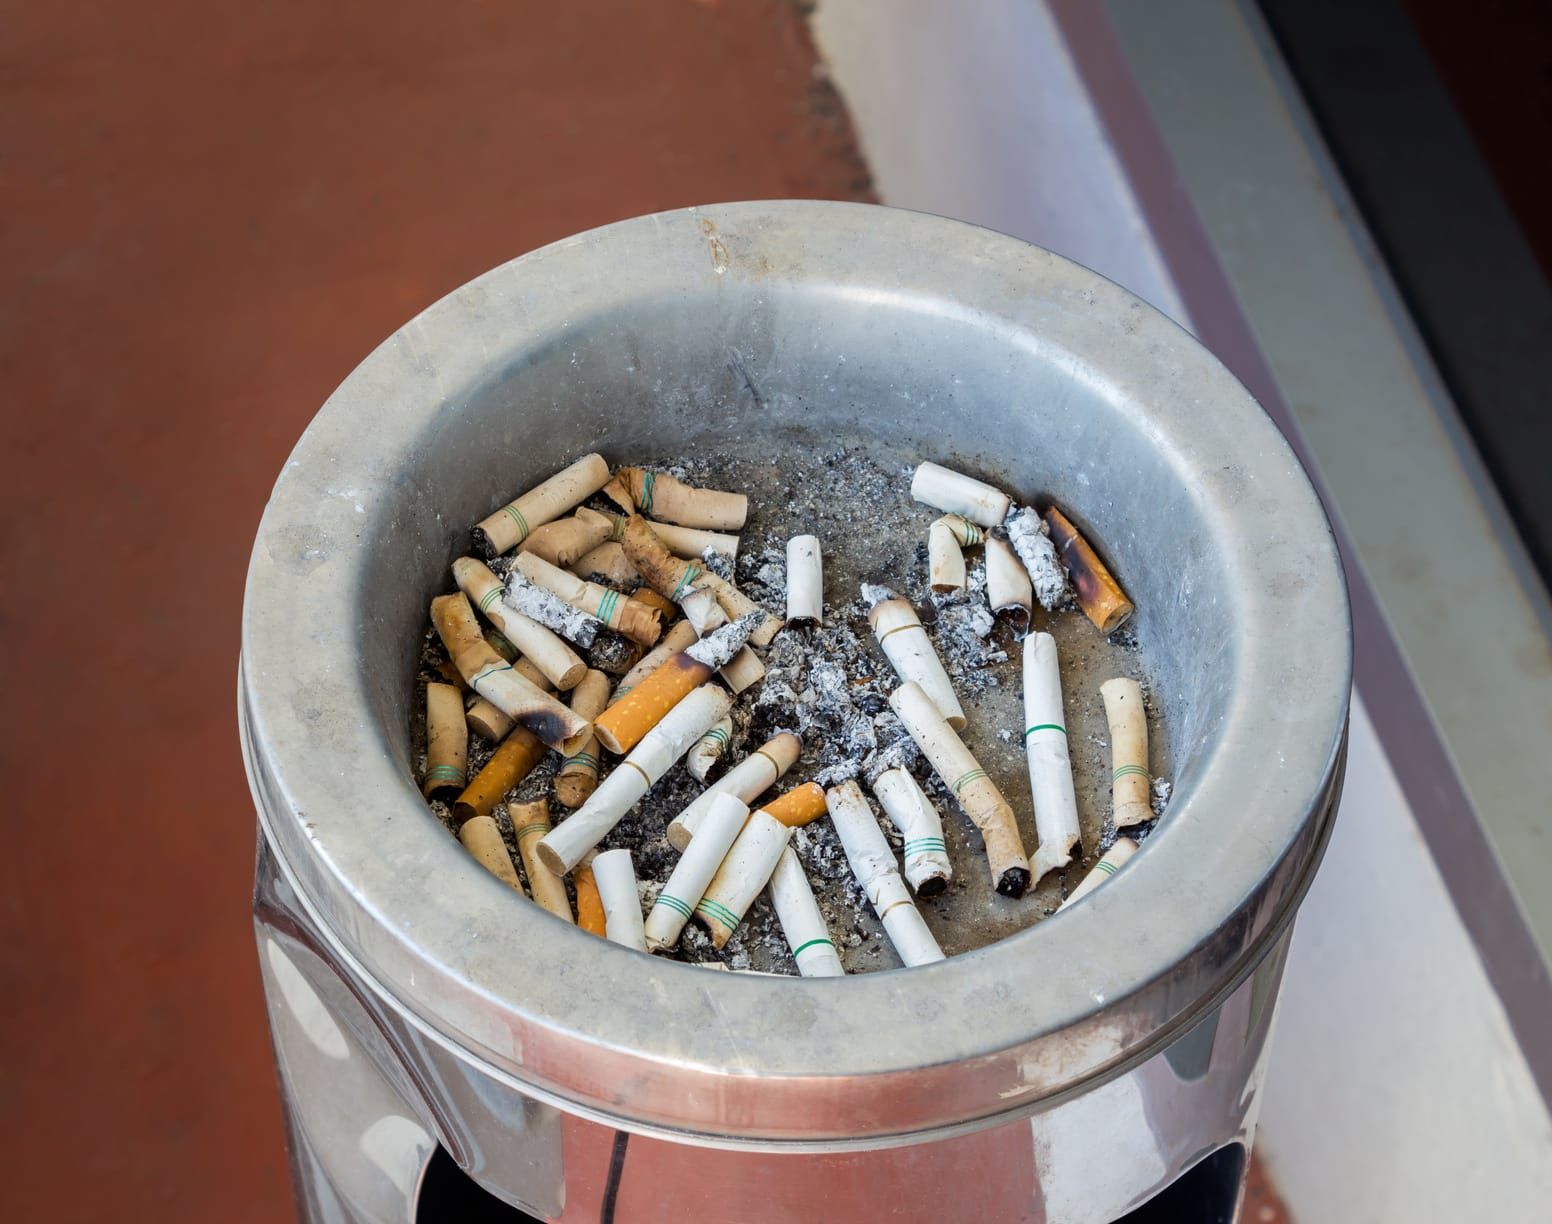 cigarette butts discarded in ashtray | electric tobacconist uk